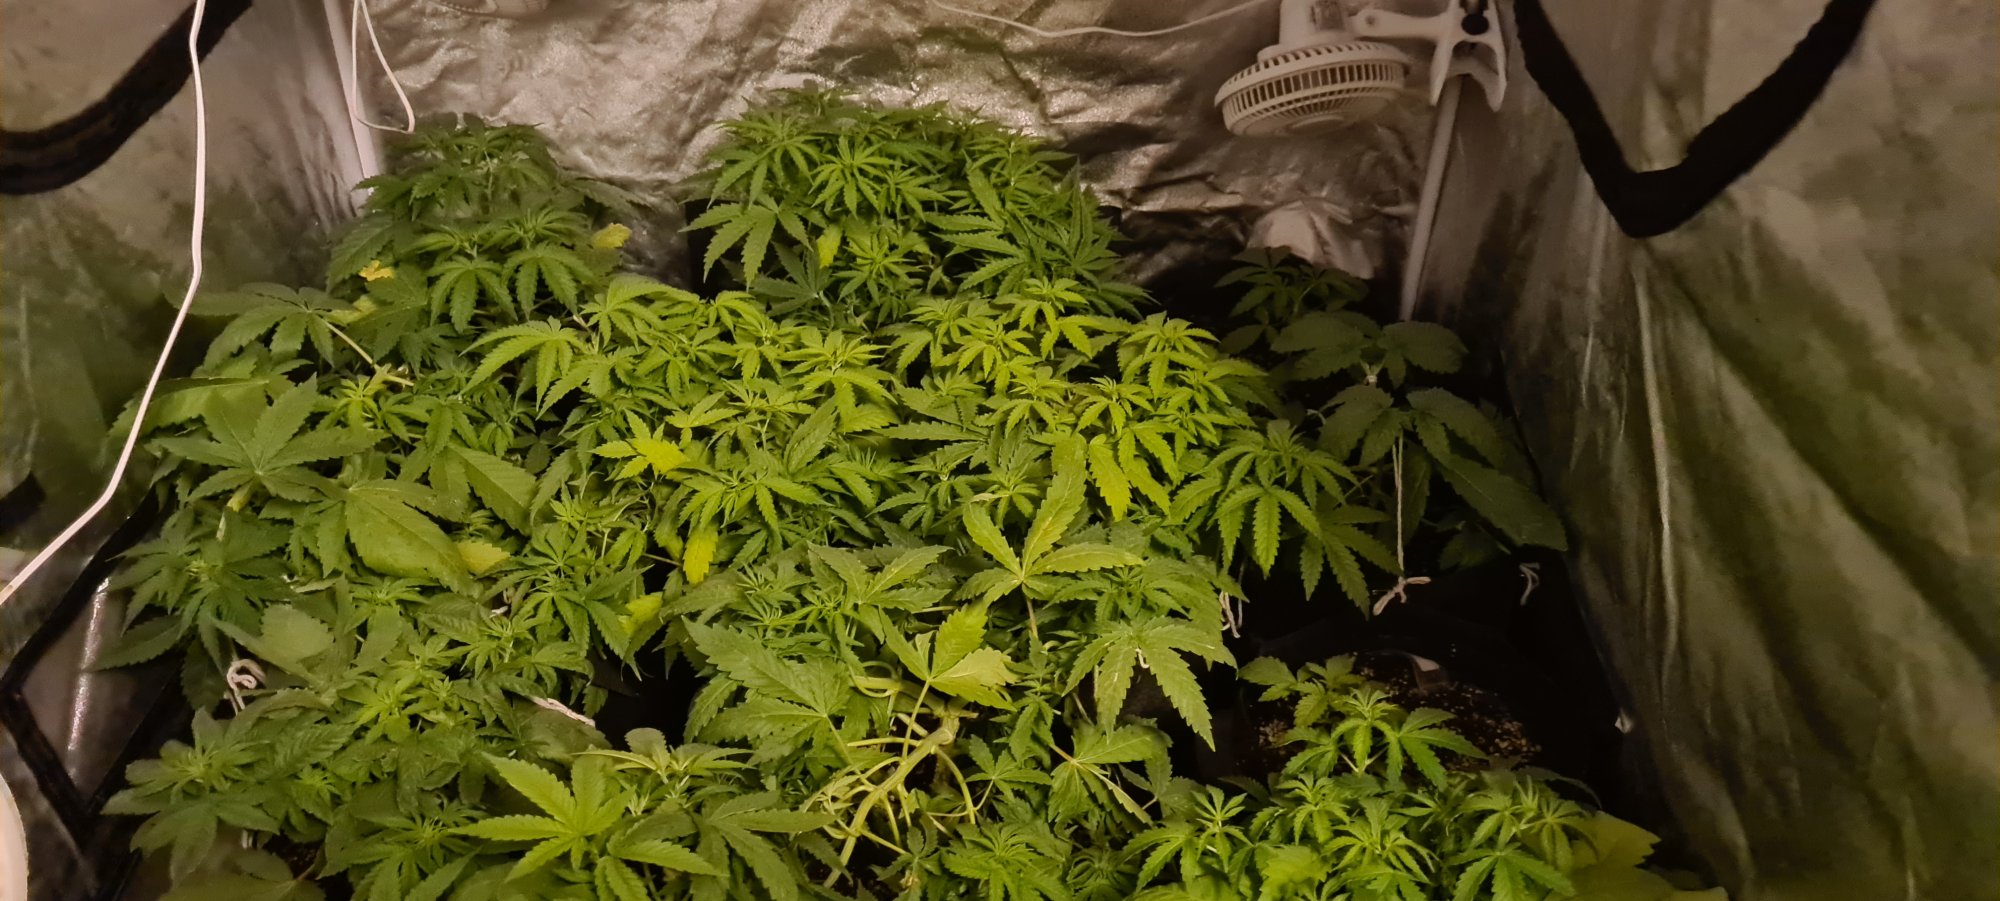 Is this nitrogen deficiency or other deficiency 5